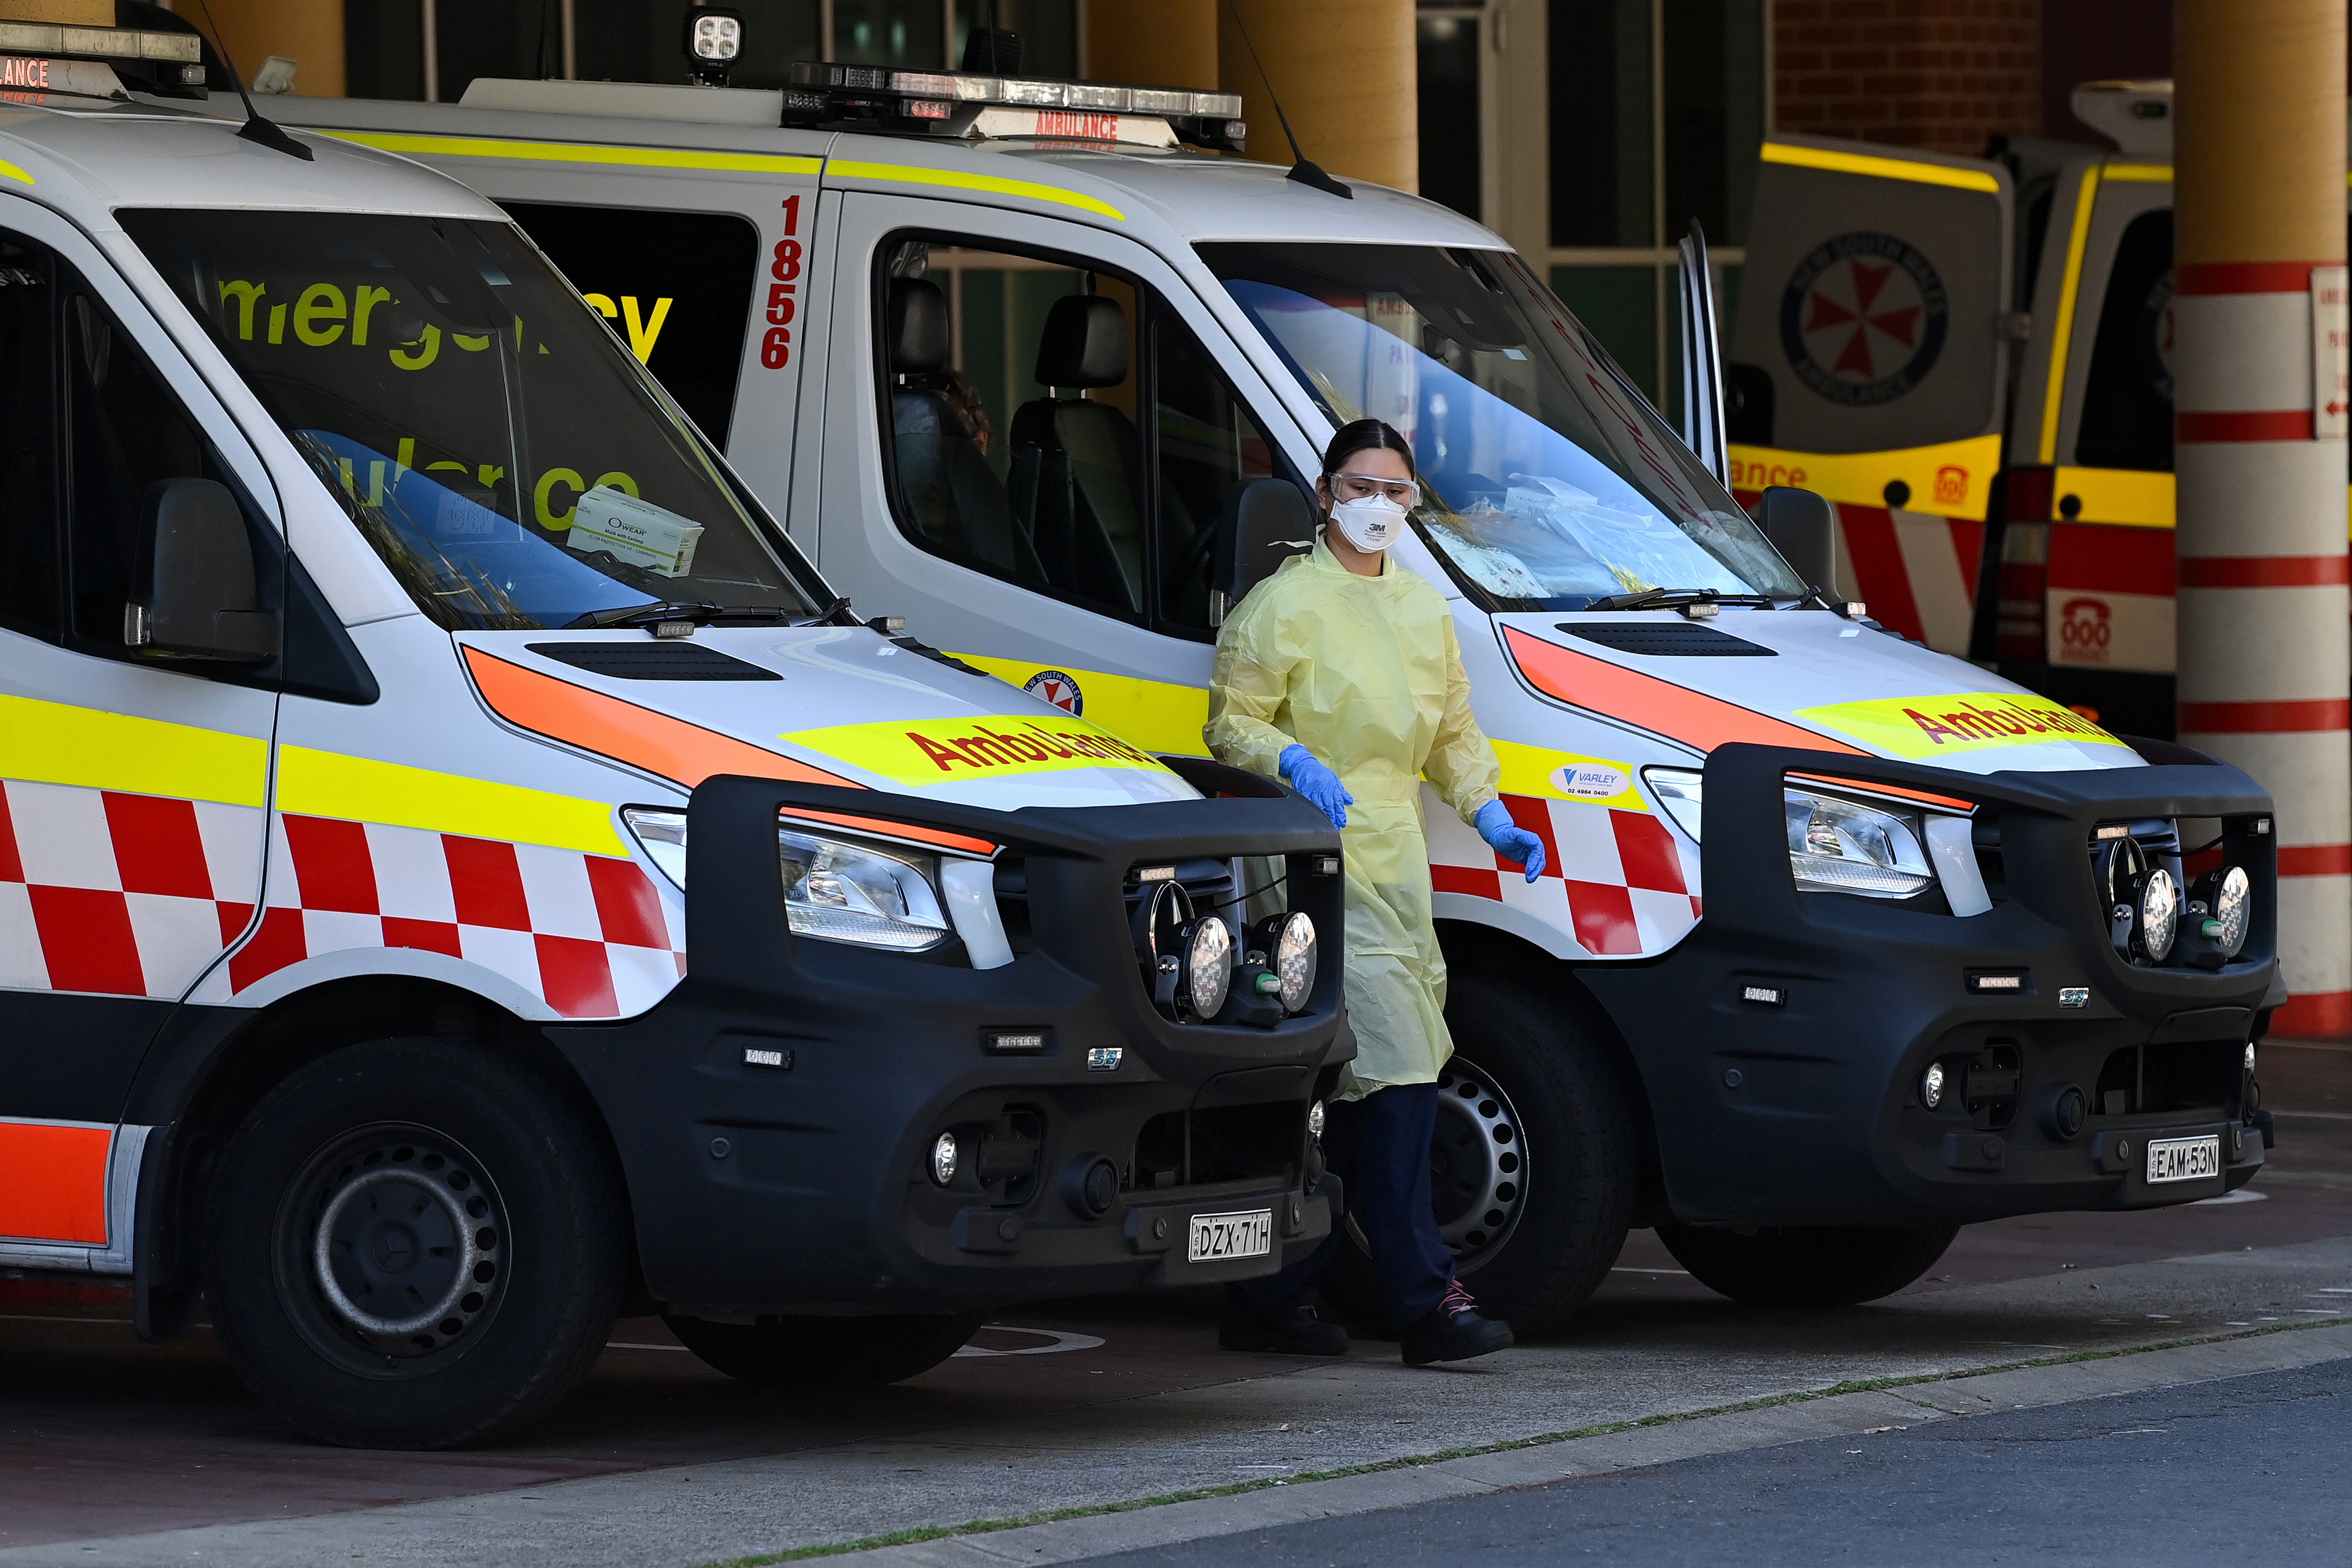 NSW Ambulance received more than 5,000 emergency calls on 1 January.